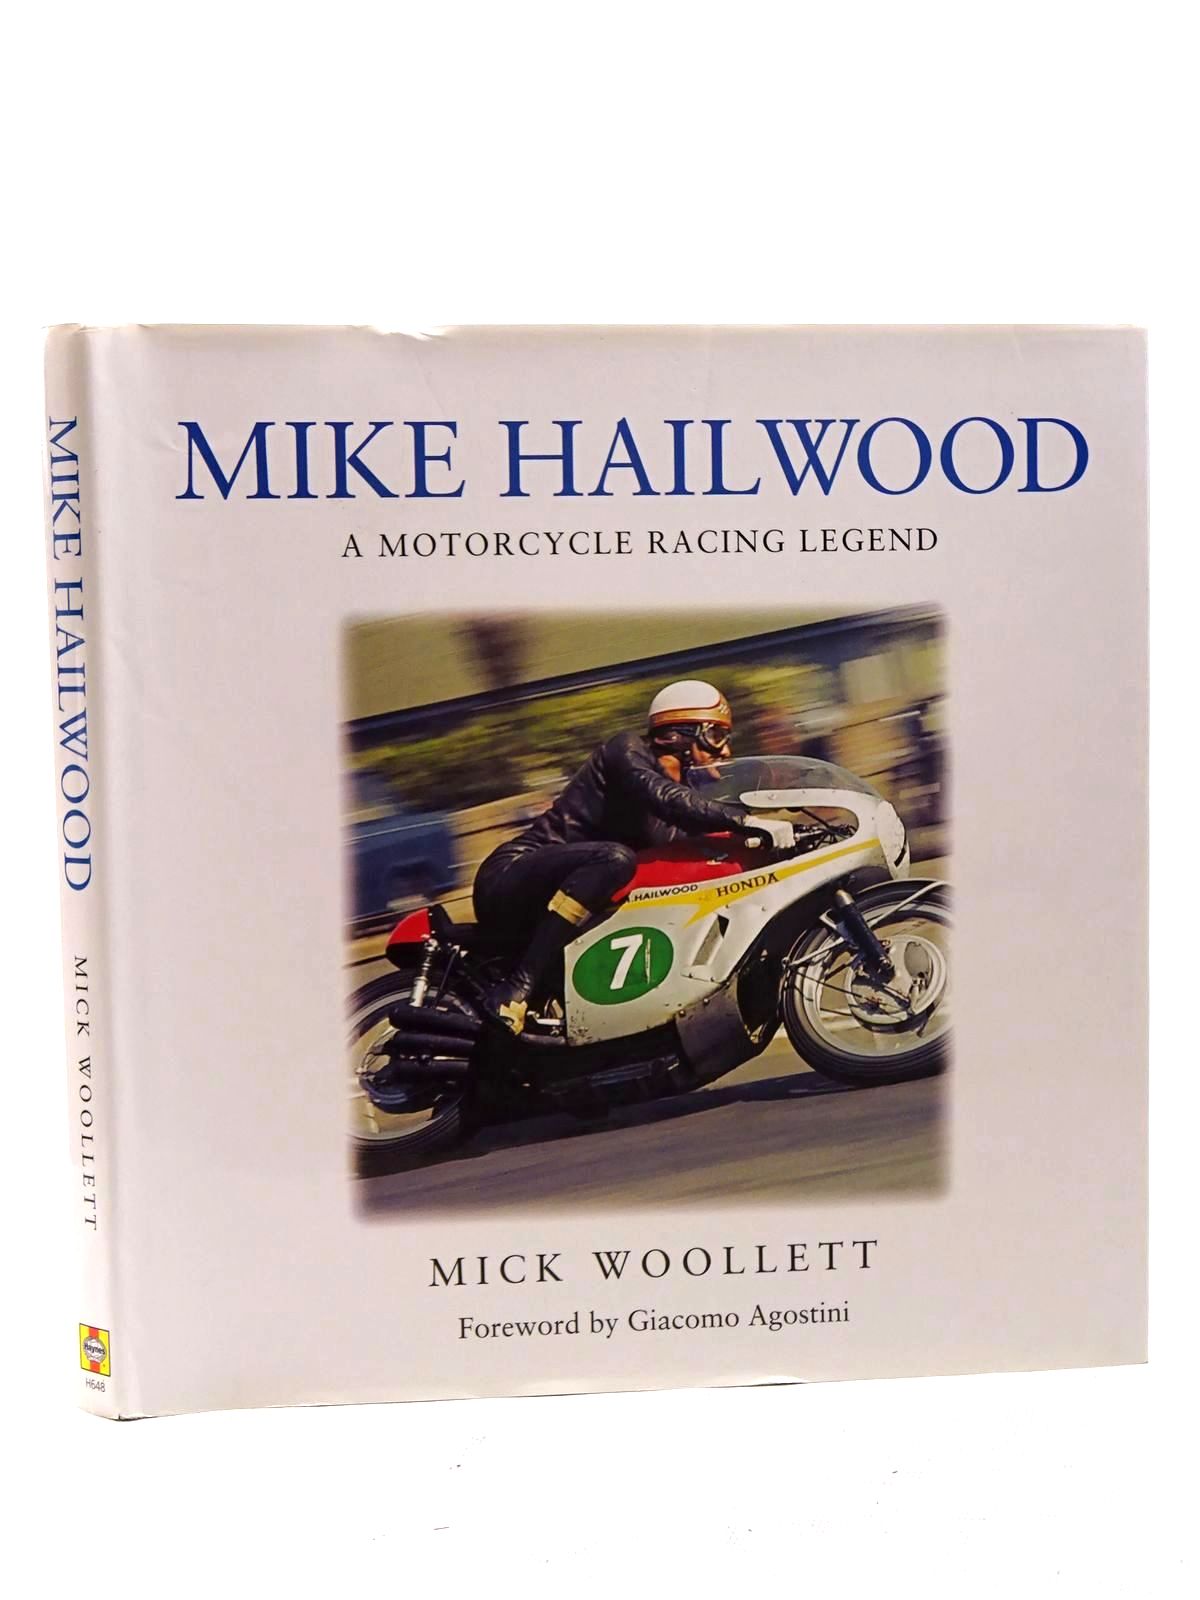 Photo of MIKE HAILWOOD A MOTORCYCLE RACING LEGEND written by Woollett, Mick published by Haynes Publishing Group (STOCK CODE: 1610579)  for sale by Stella & Rose's Books